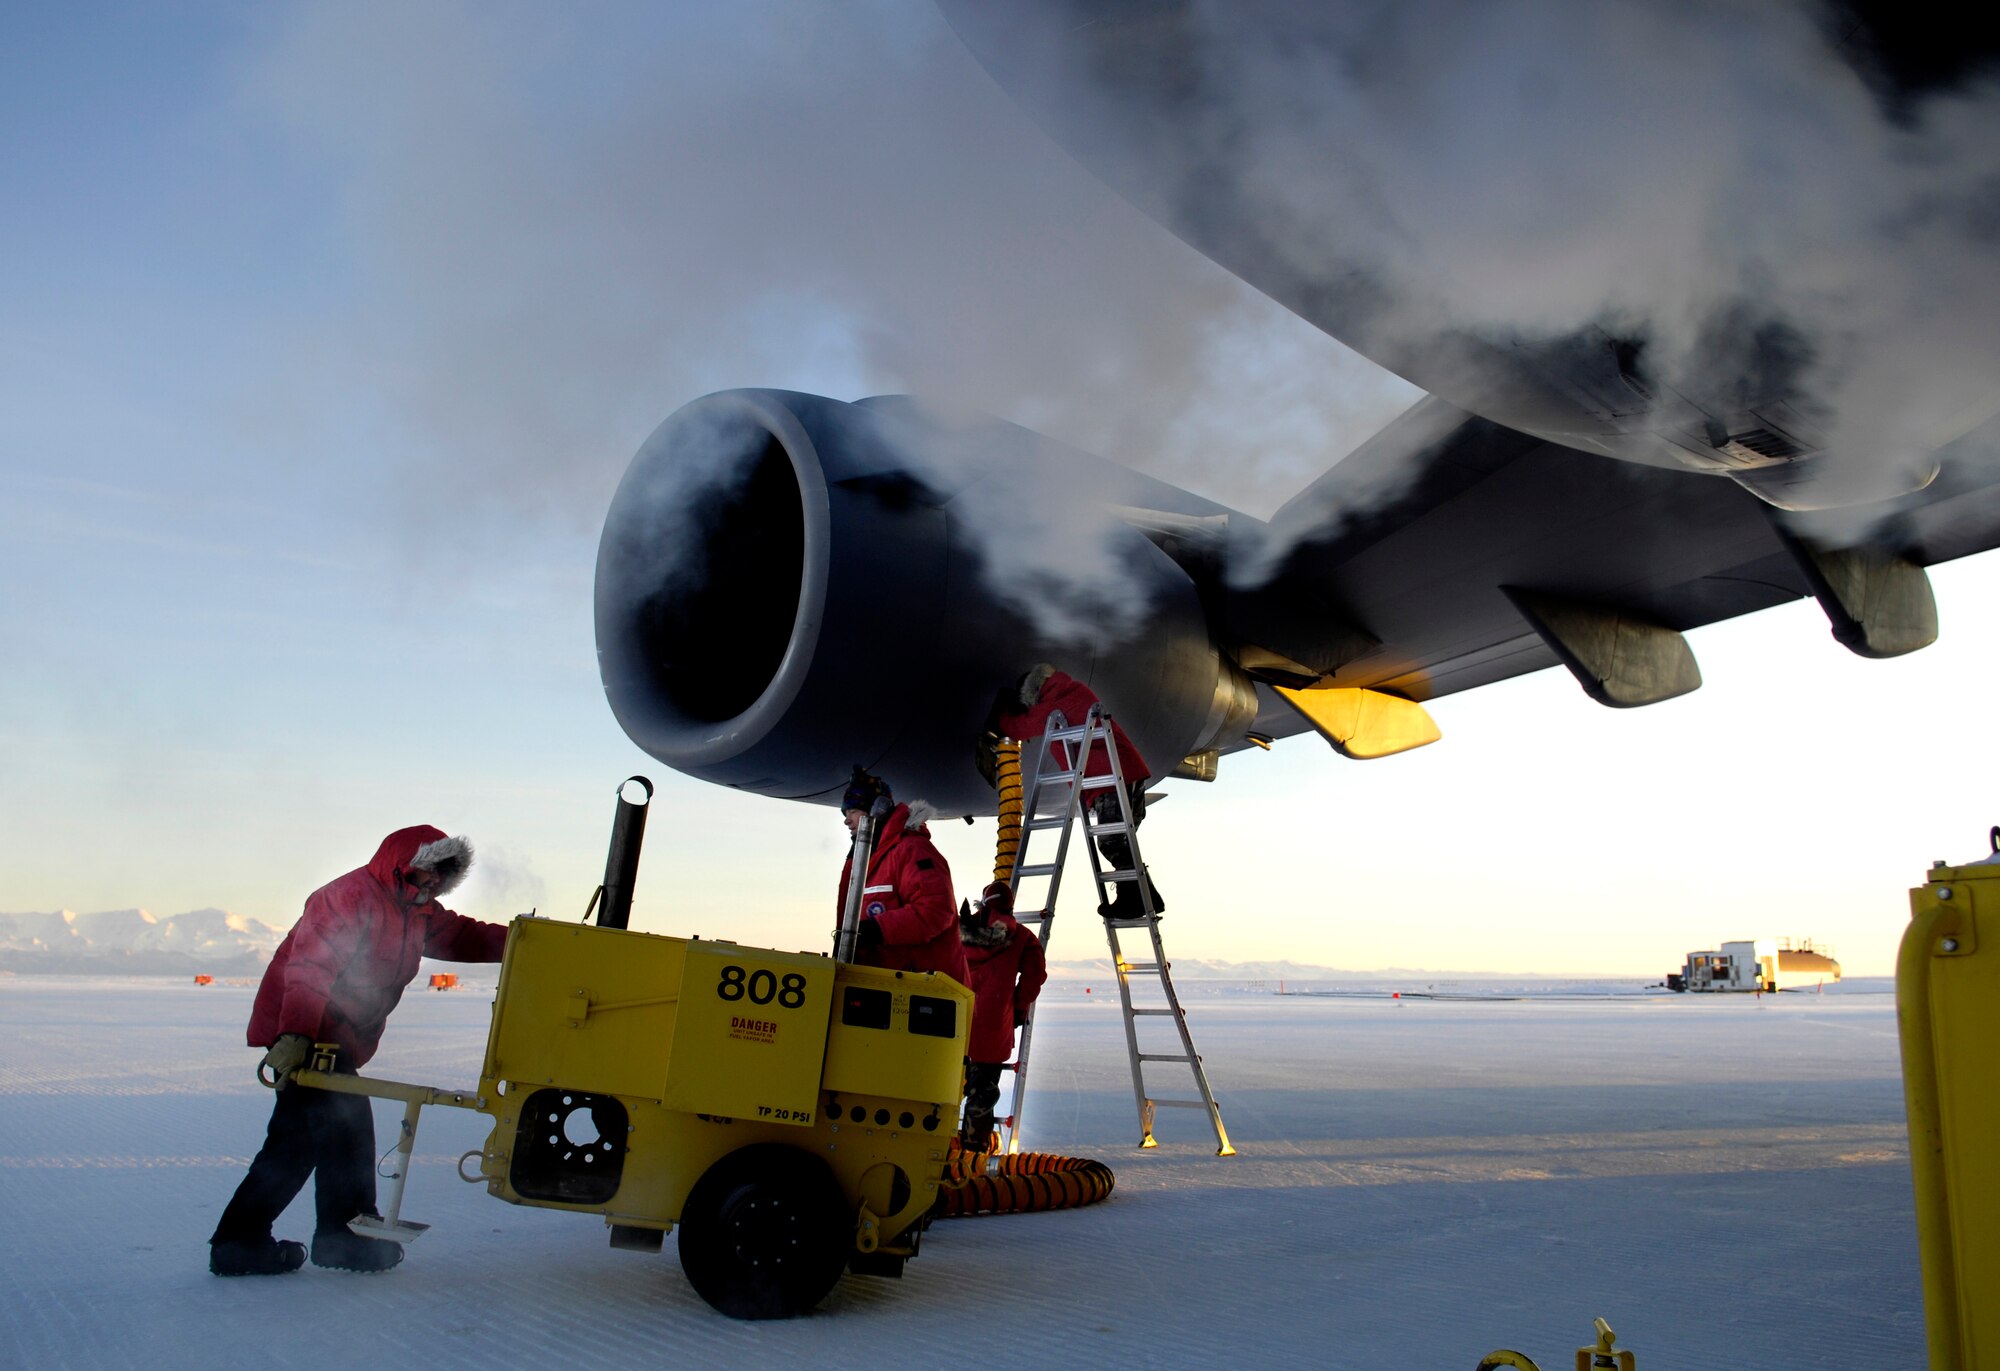 Maintainers attach heater hoses to the engines of a C-17 Globemaster III Aug. 25, 2007 at Pegasus White Ice Runway, Antarctica during an Operation Deep Freeze winter fly-in mission. Because of the extreme temperatures, heaters are used on the aircraft to prevent maintenance problems and keep it functioning properly upon engine start-up. A C-17 and 31 Airmen from McChord Air Force Base, Wash. are conducting the annual winter fly-in augmentation of scientist, support personnel, food and equipment for the U.S. Antarctic Program at McMurdo Station, Antarctica. WinFly is the opening of the first flights to McMurdo station, which closed for the austral winter in Feb. (U.S. Air Force photo/Tech. Sgt. Shane A. Cuomo)